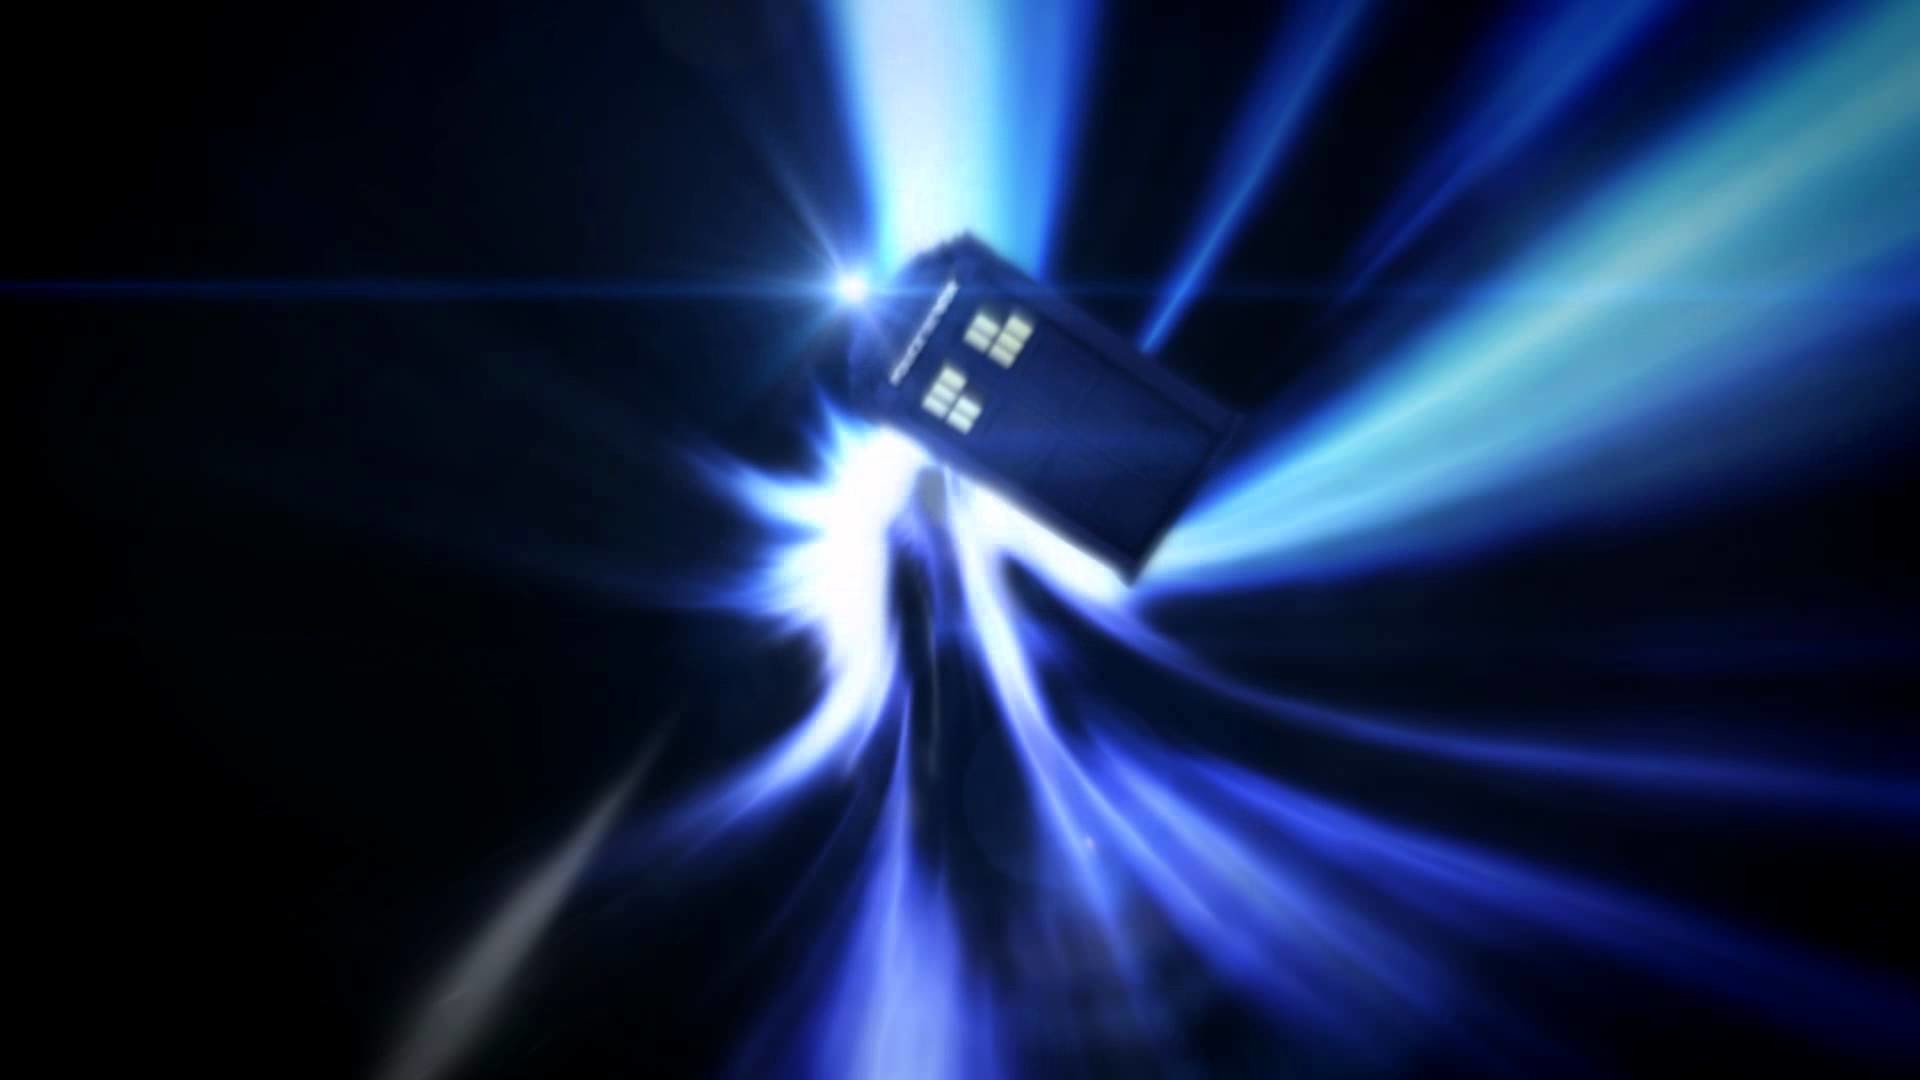 1920x1080 Displaying 13> Images For - Tardis In Time Vortex Screensaver.